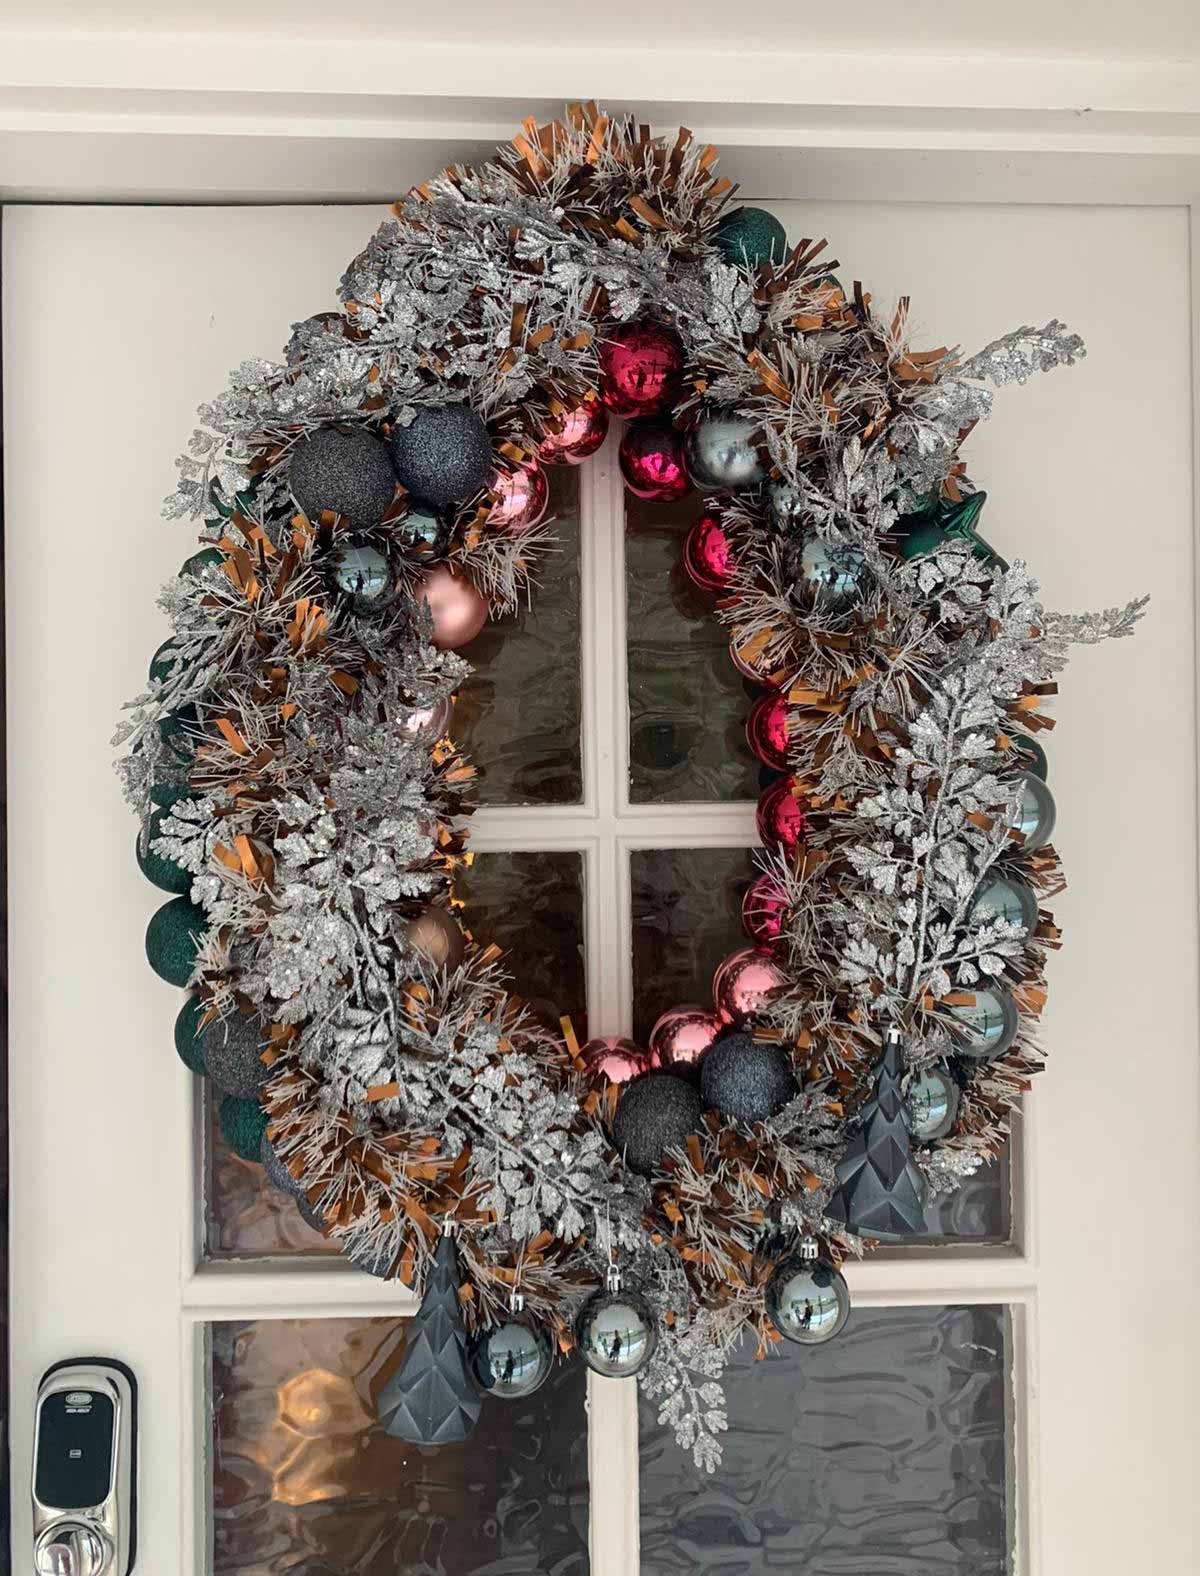 My wife's attempt at a Christmas wreath - I named it our festive door vag